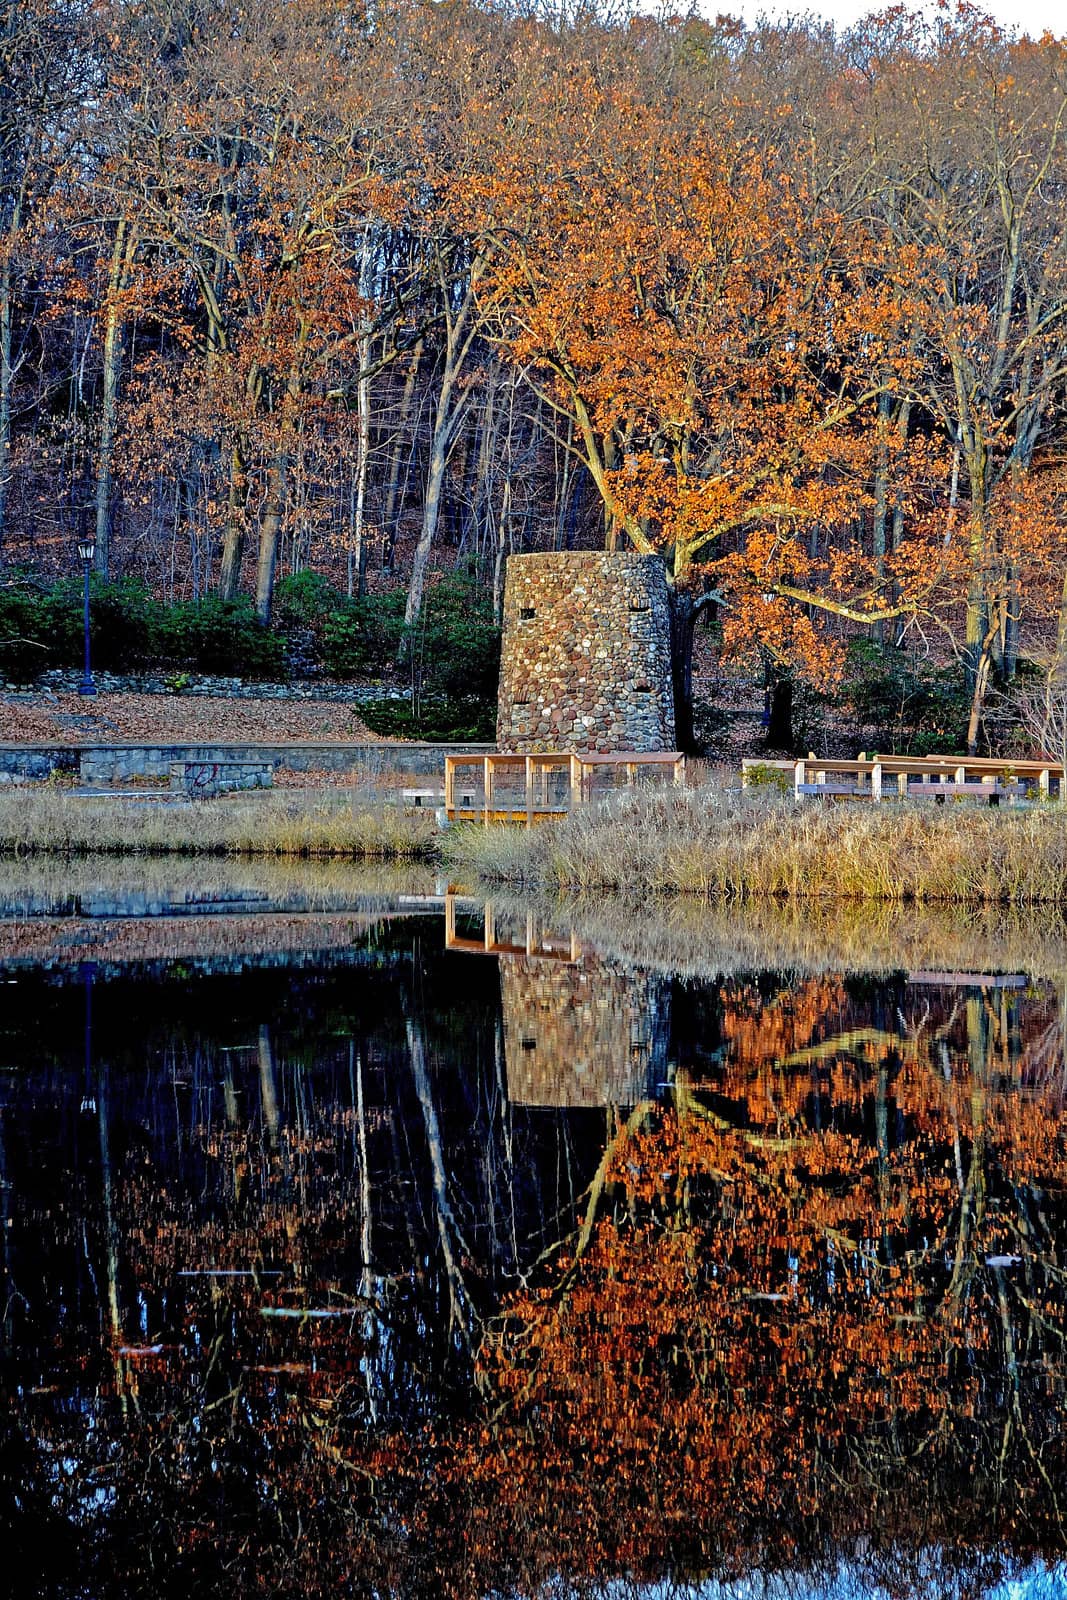 The colorful fall foliage reflected in the mirror like surface of the pond along with the stone tower in Rockwell Park.